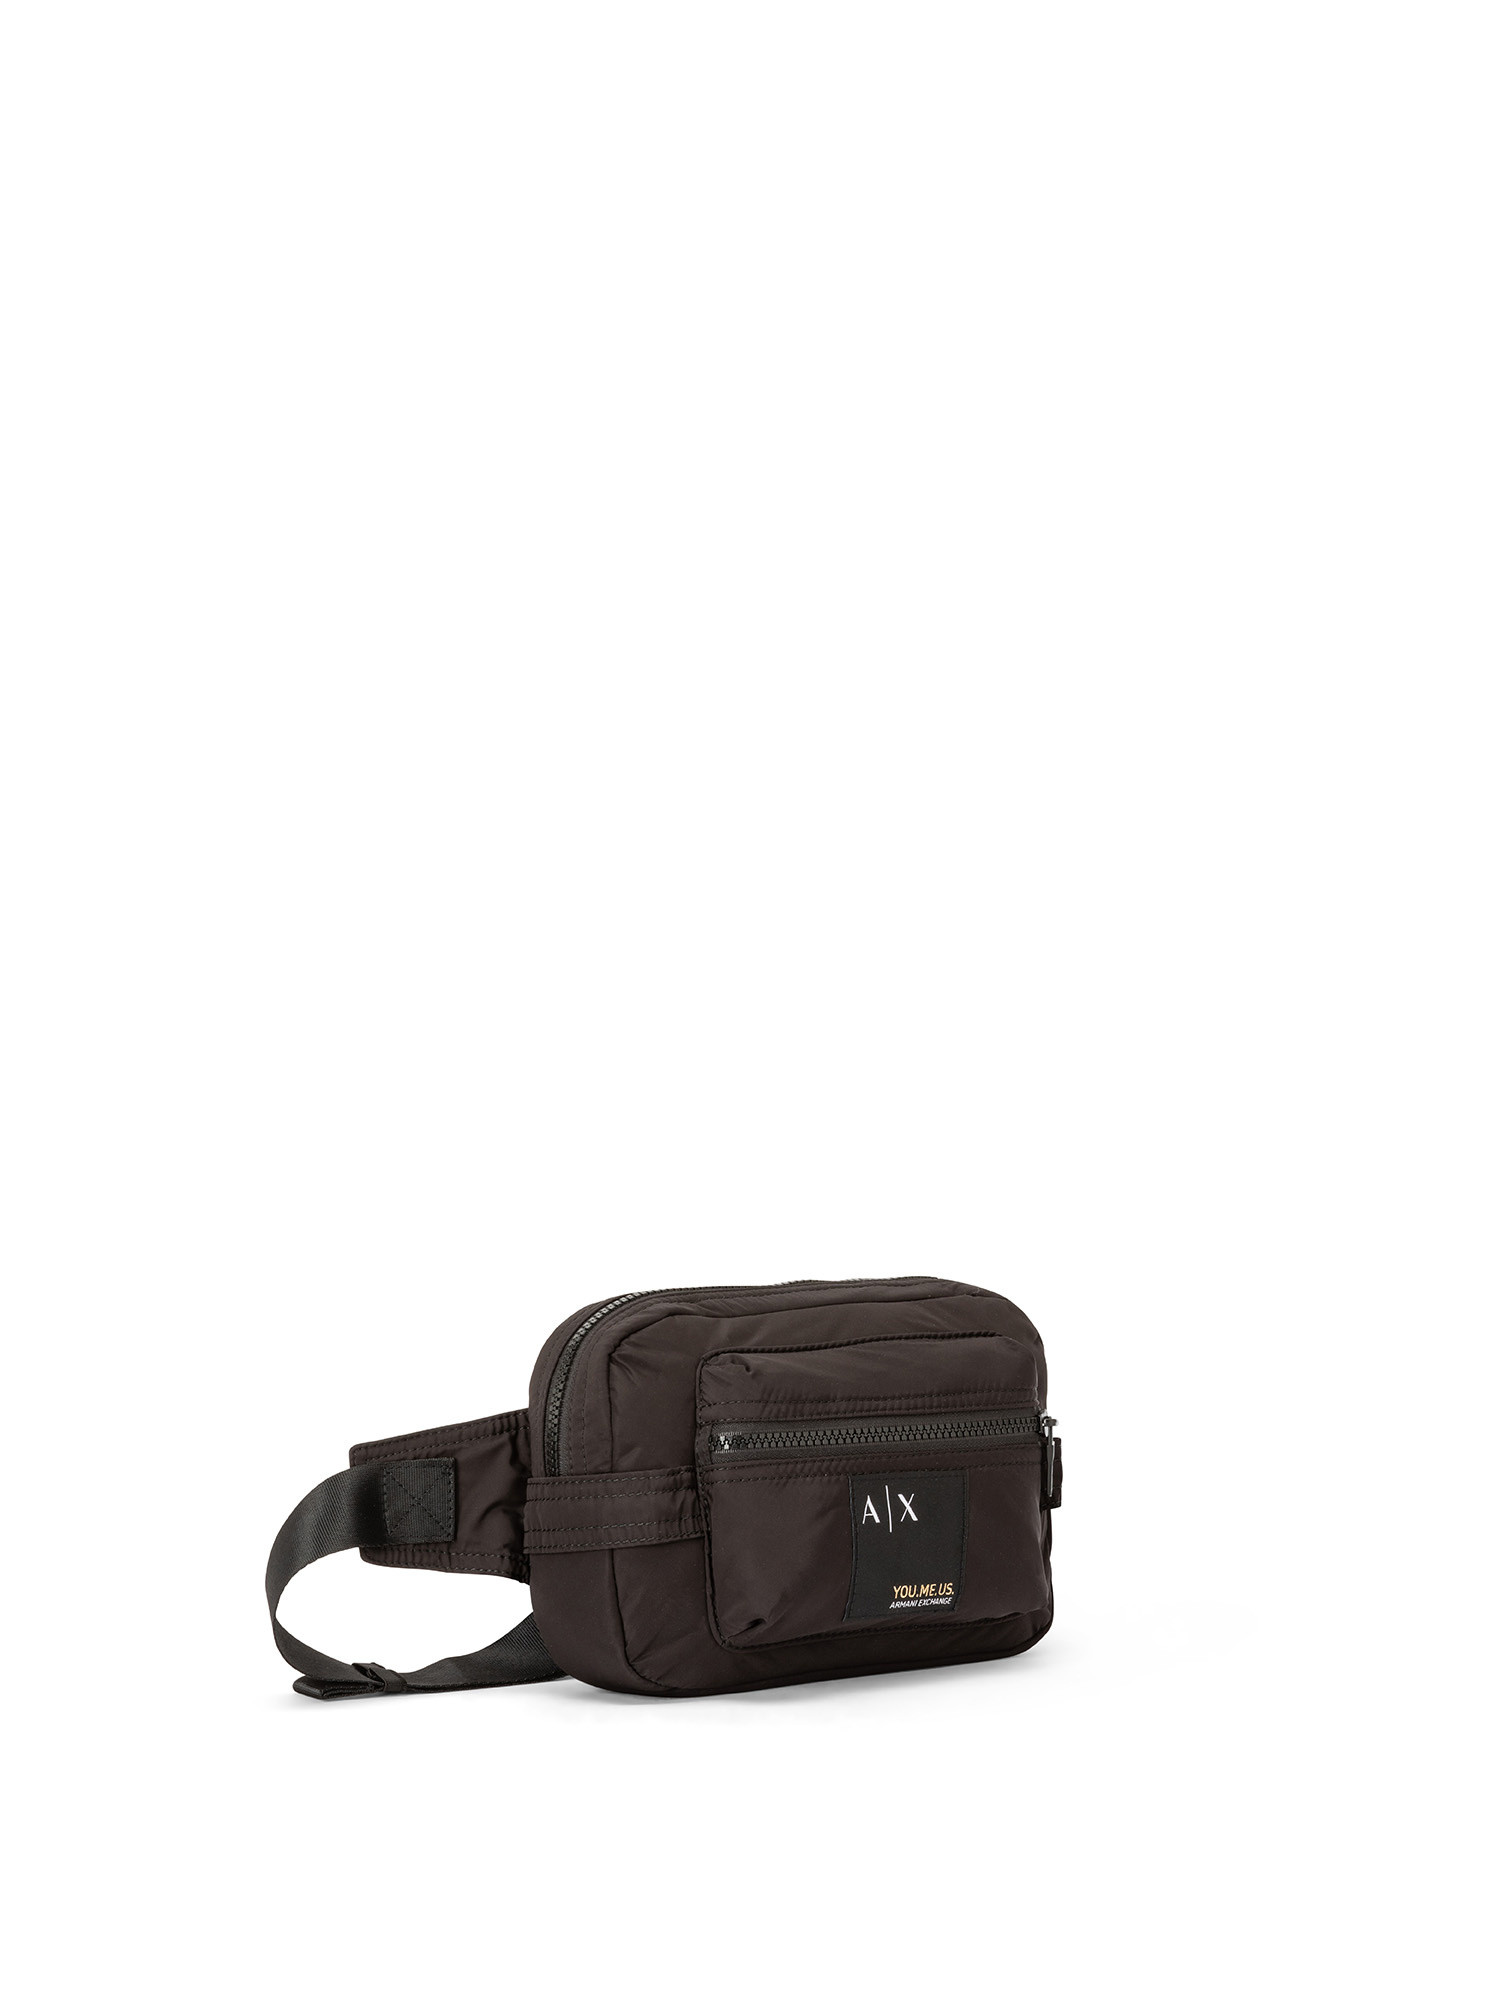 Armani Exchange - Waist bag in recycled technical fabric, Black, large image number 1